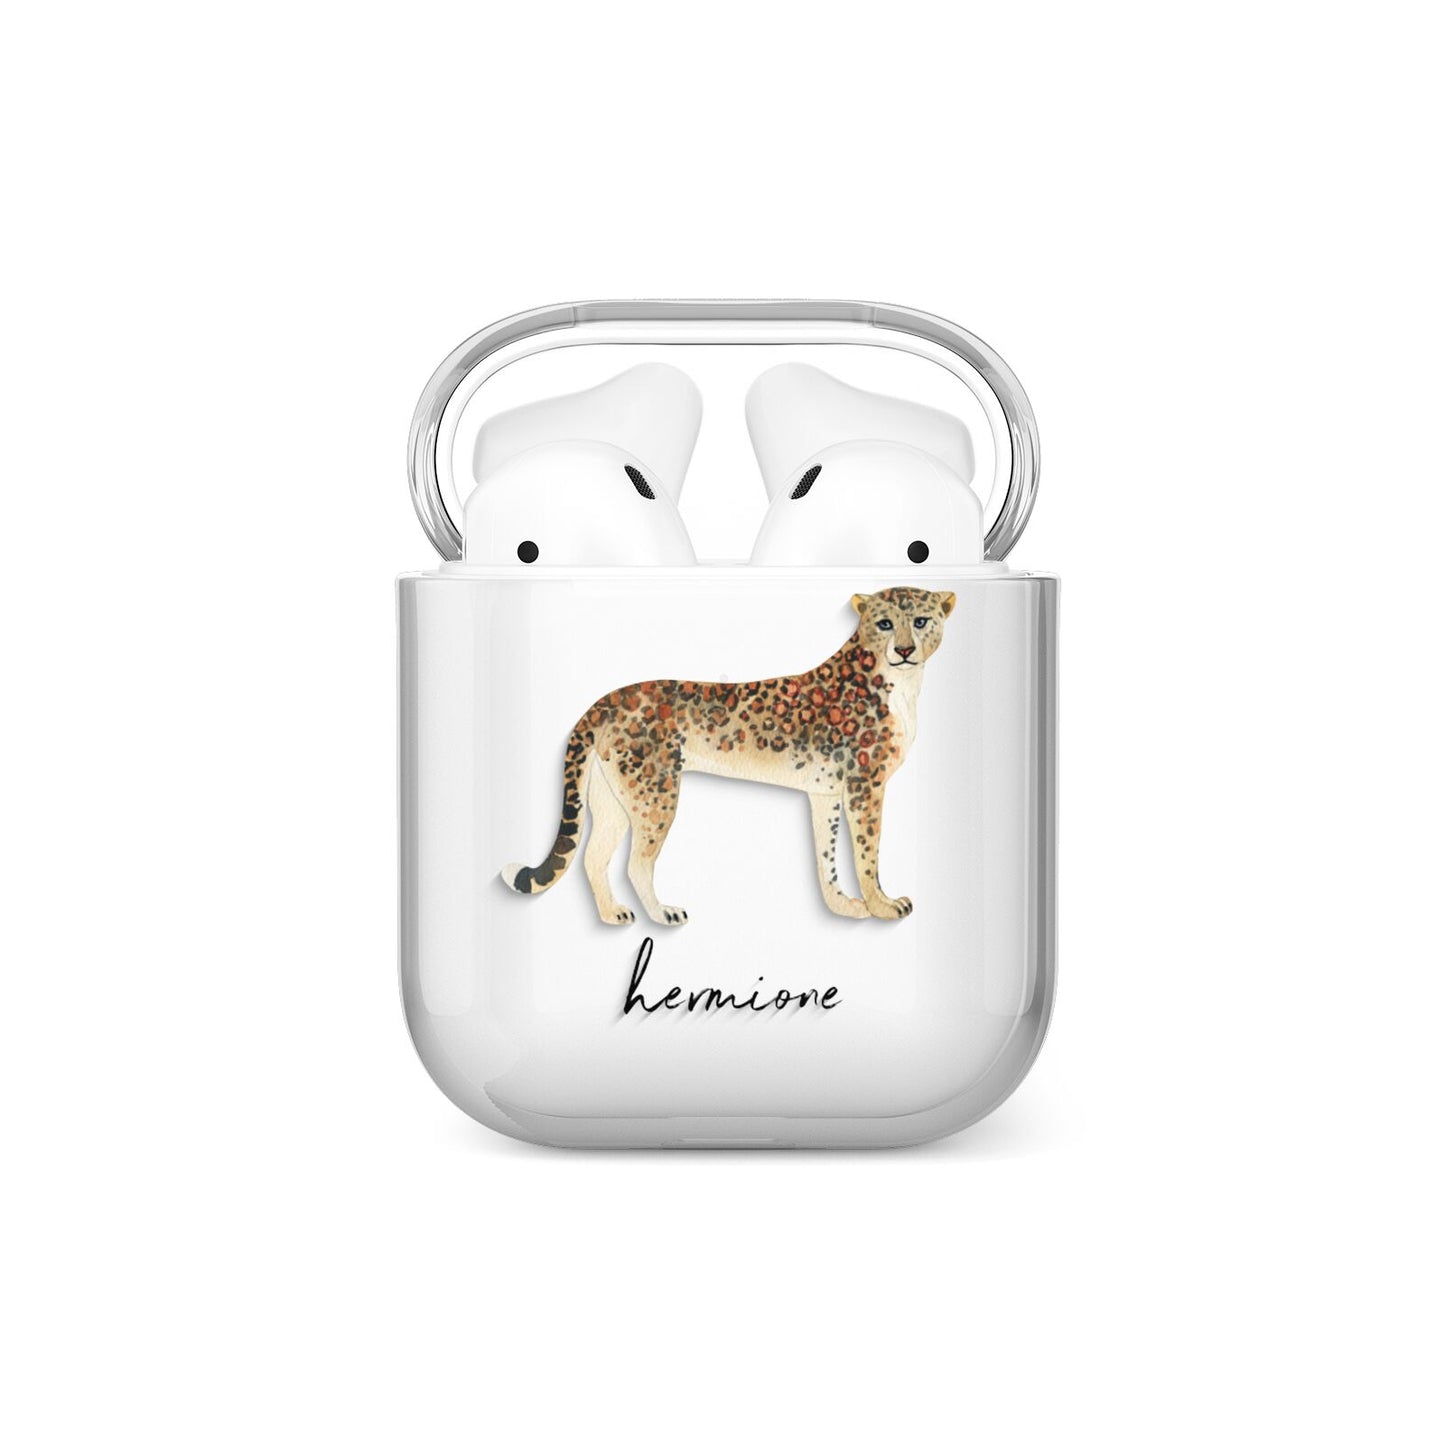 Personalised Leopard AirPods Case